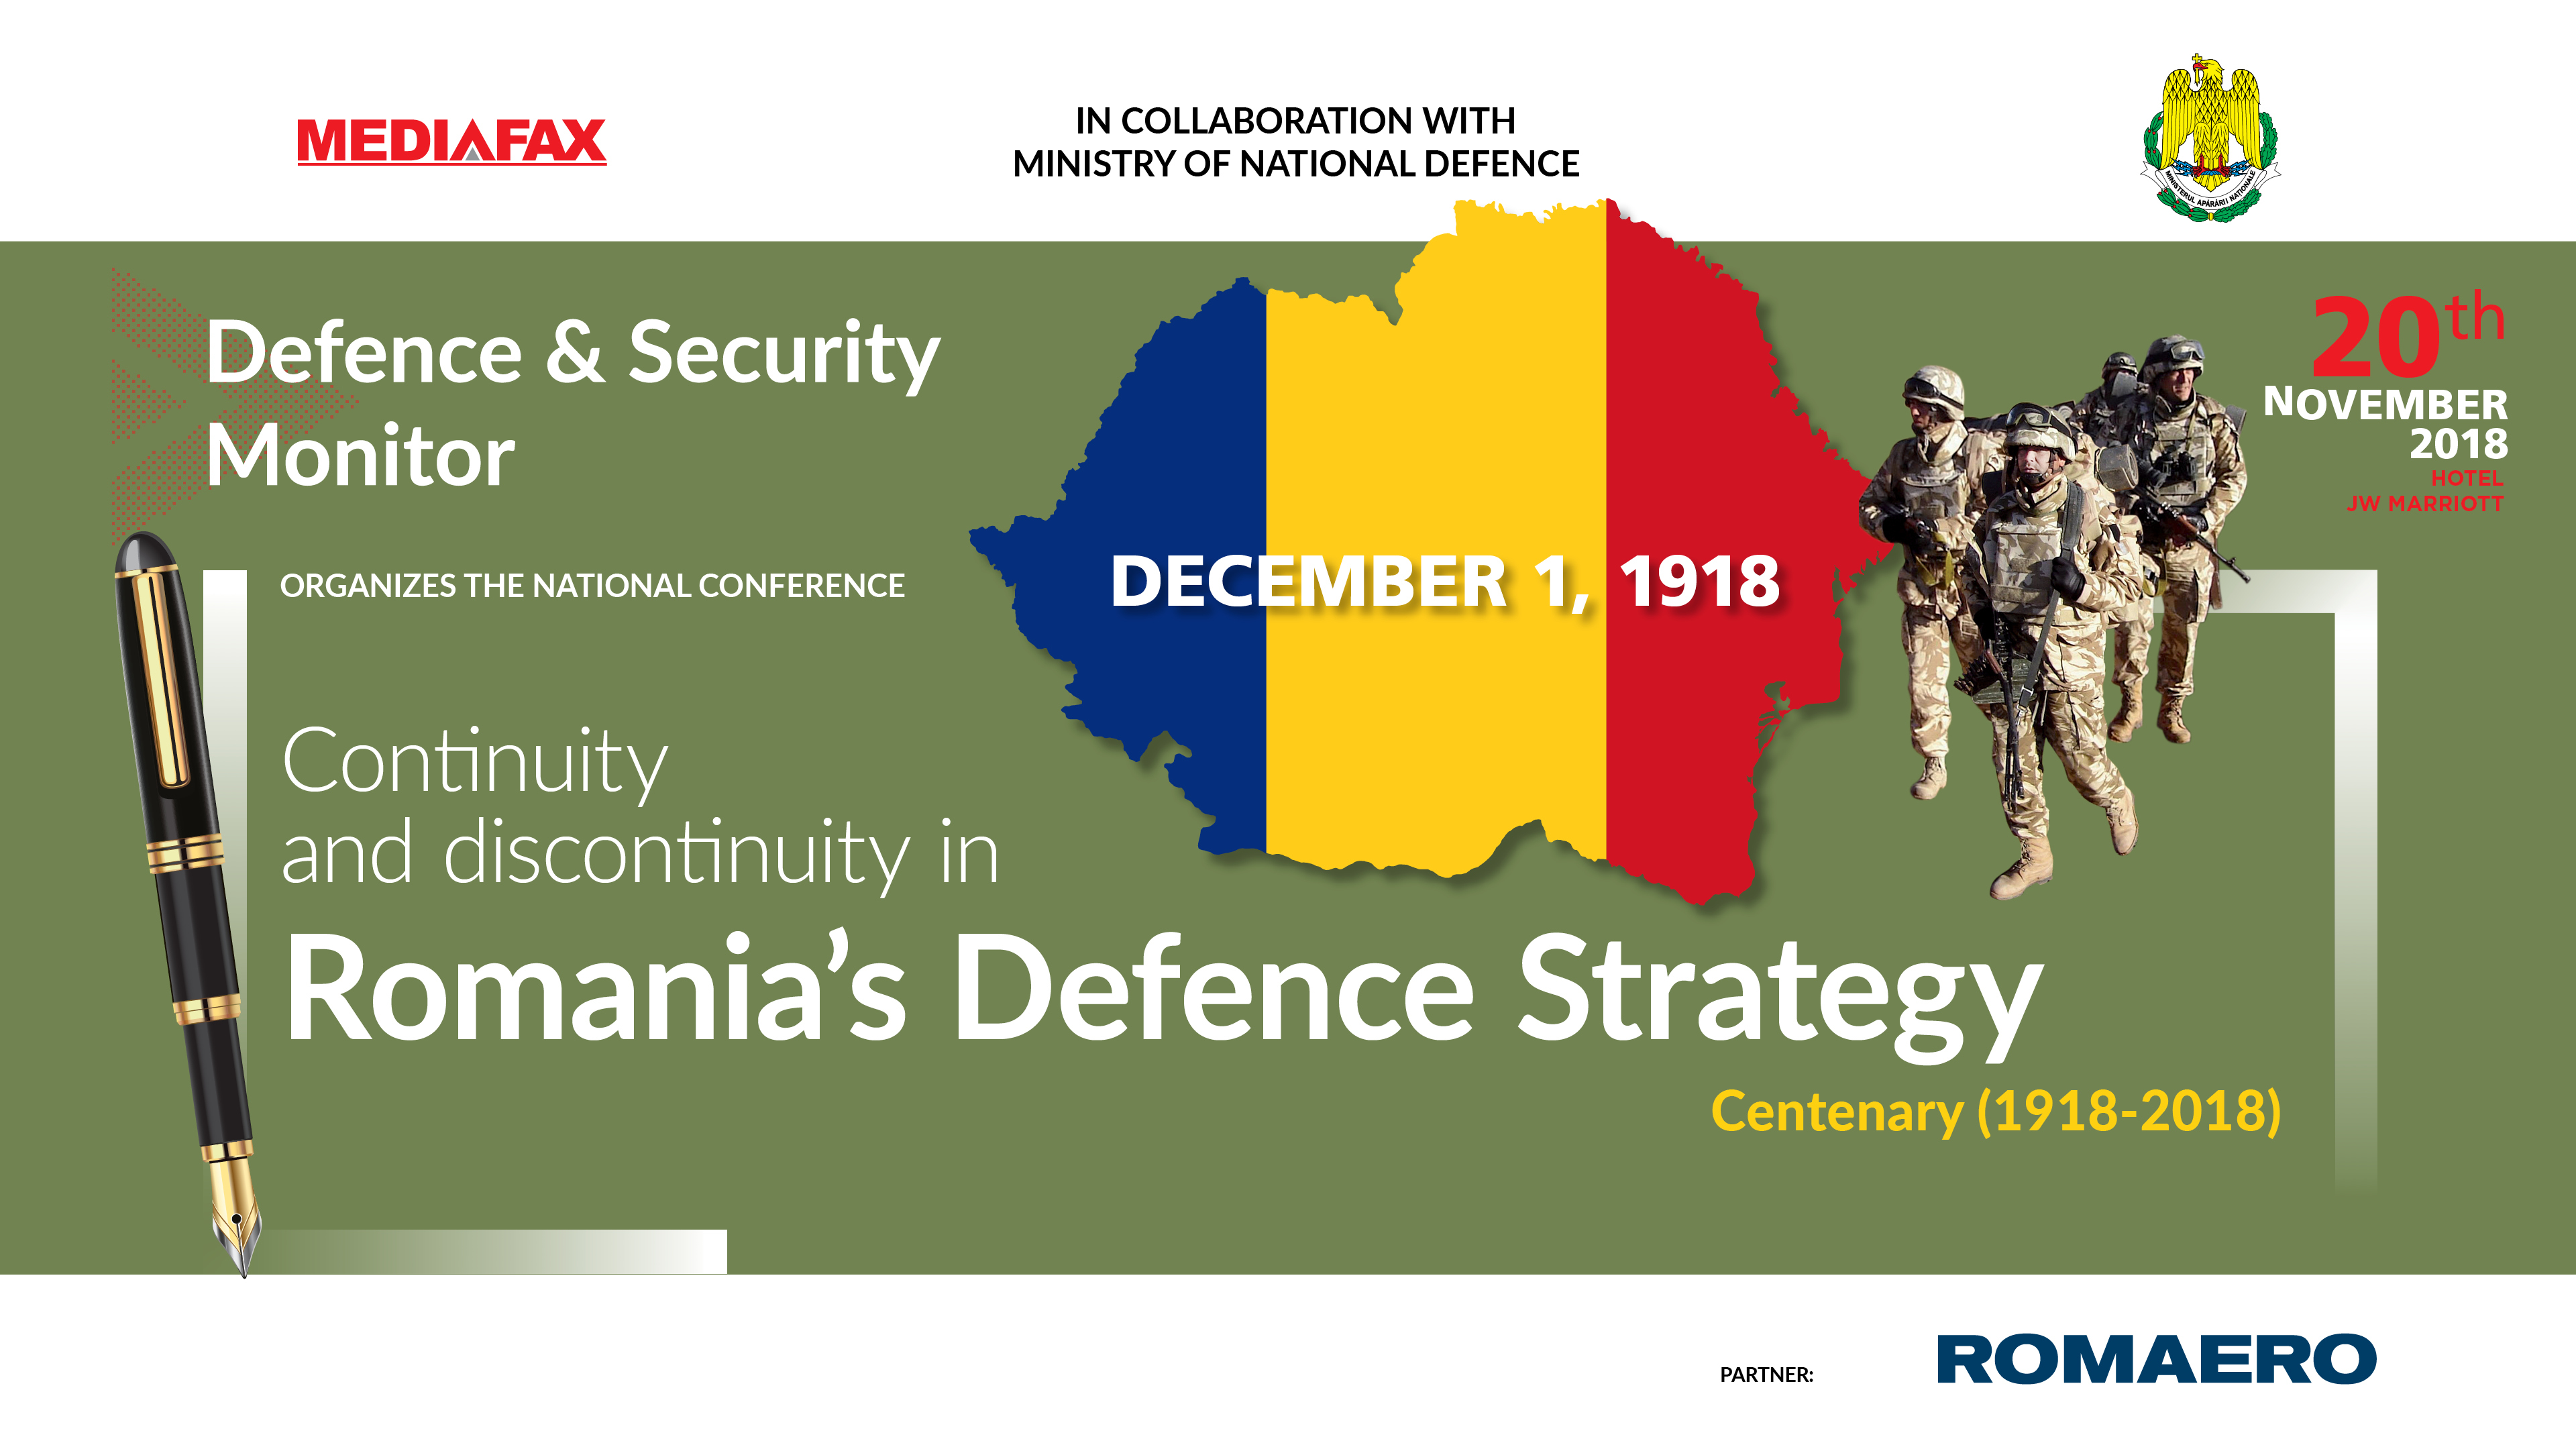 Continuity and discontinuity in Romania’s defence strategy during the 100 years since Romania’s Great Union 